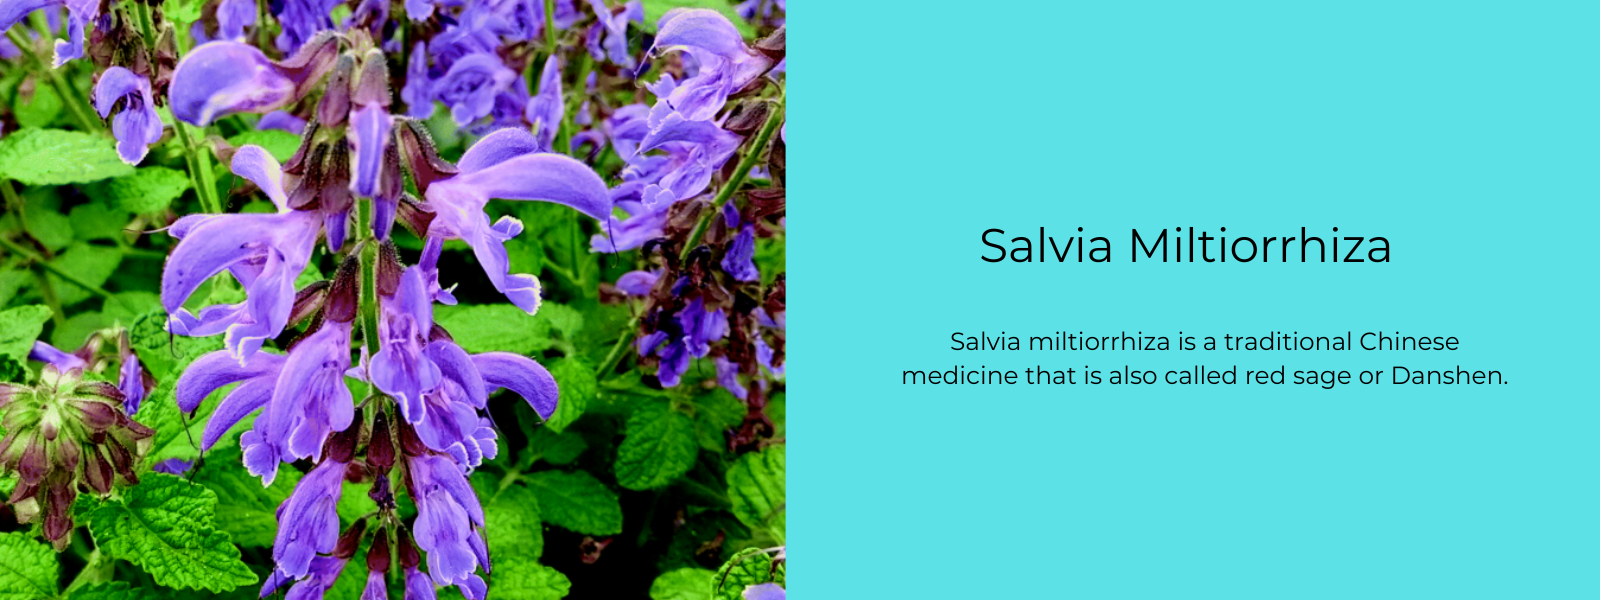 Salvia Miltiorrhiza - Health Benefits, Uses and Important Facts